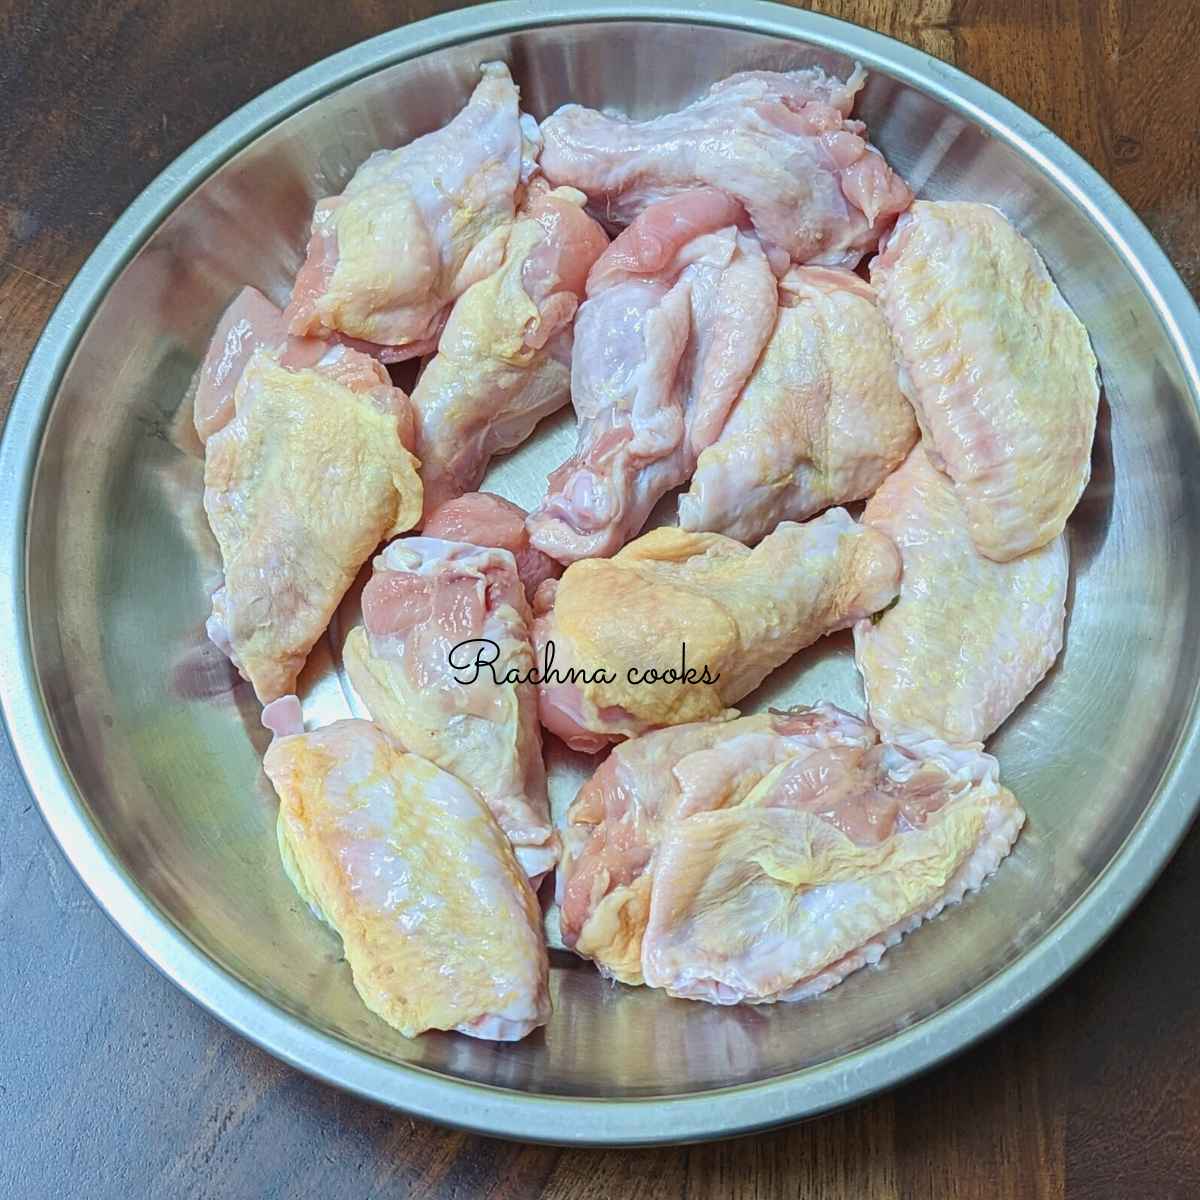 Chicken wings with skin in a plate.